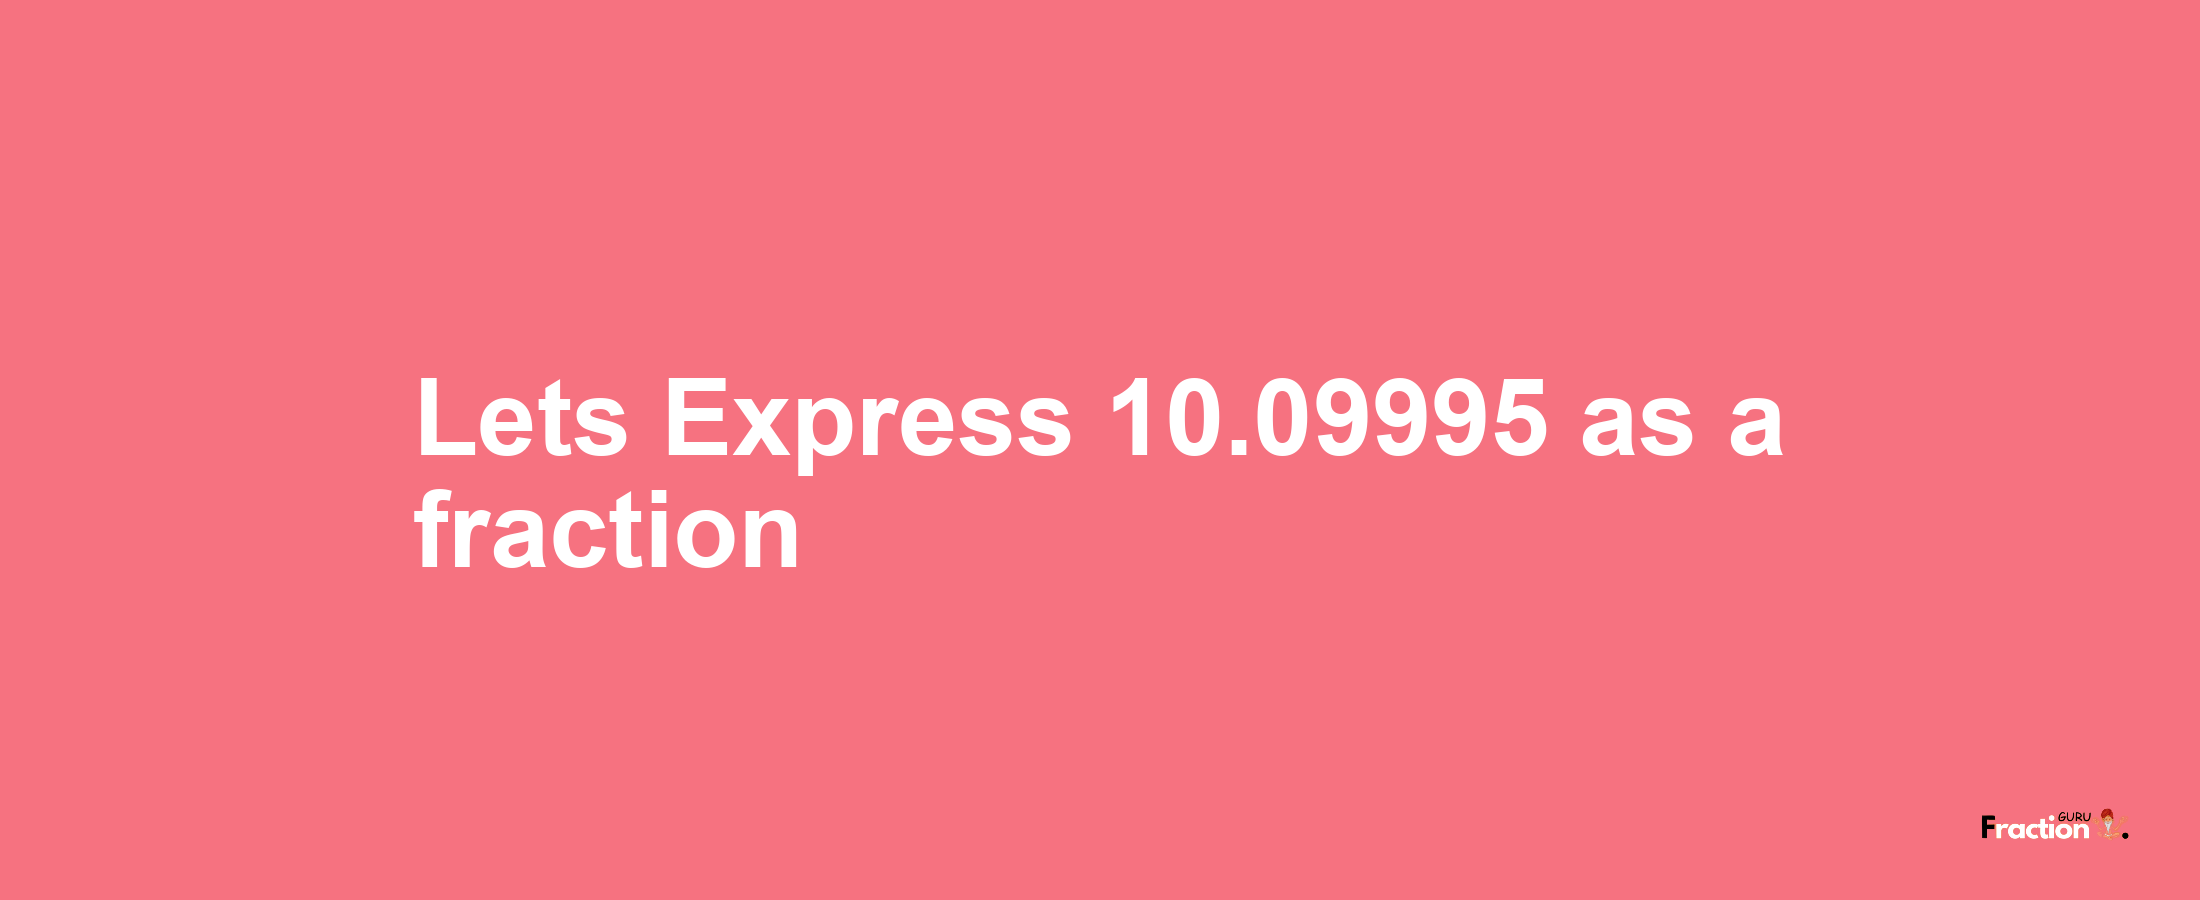 Lets Express 10.09995 as afraction